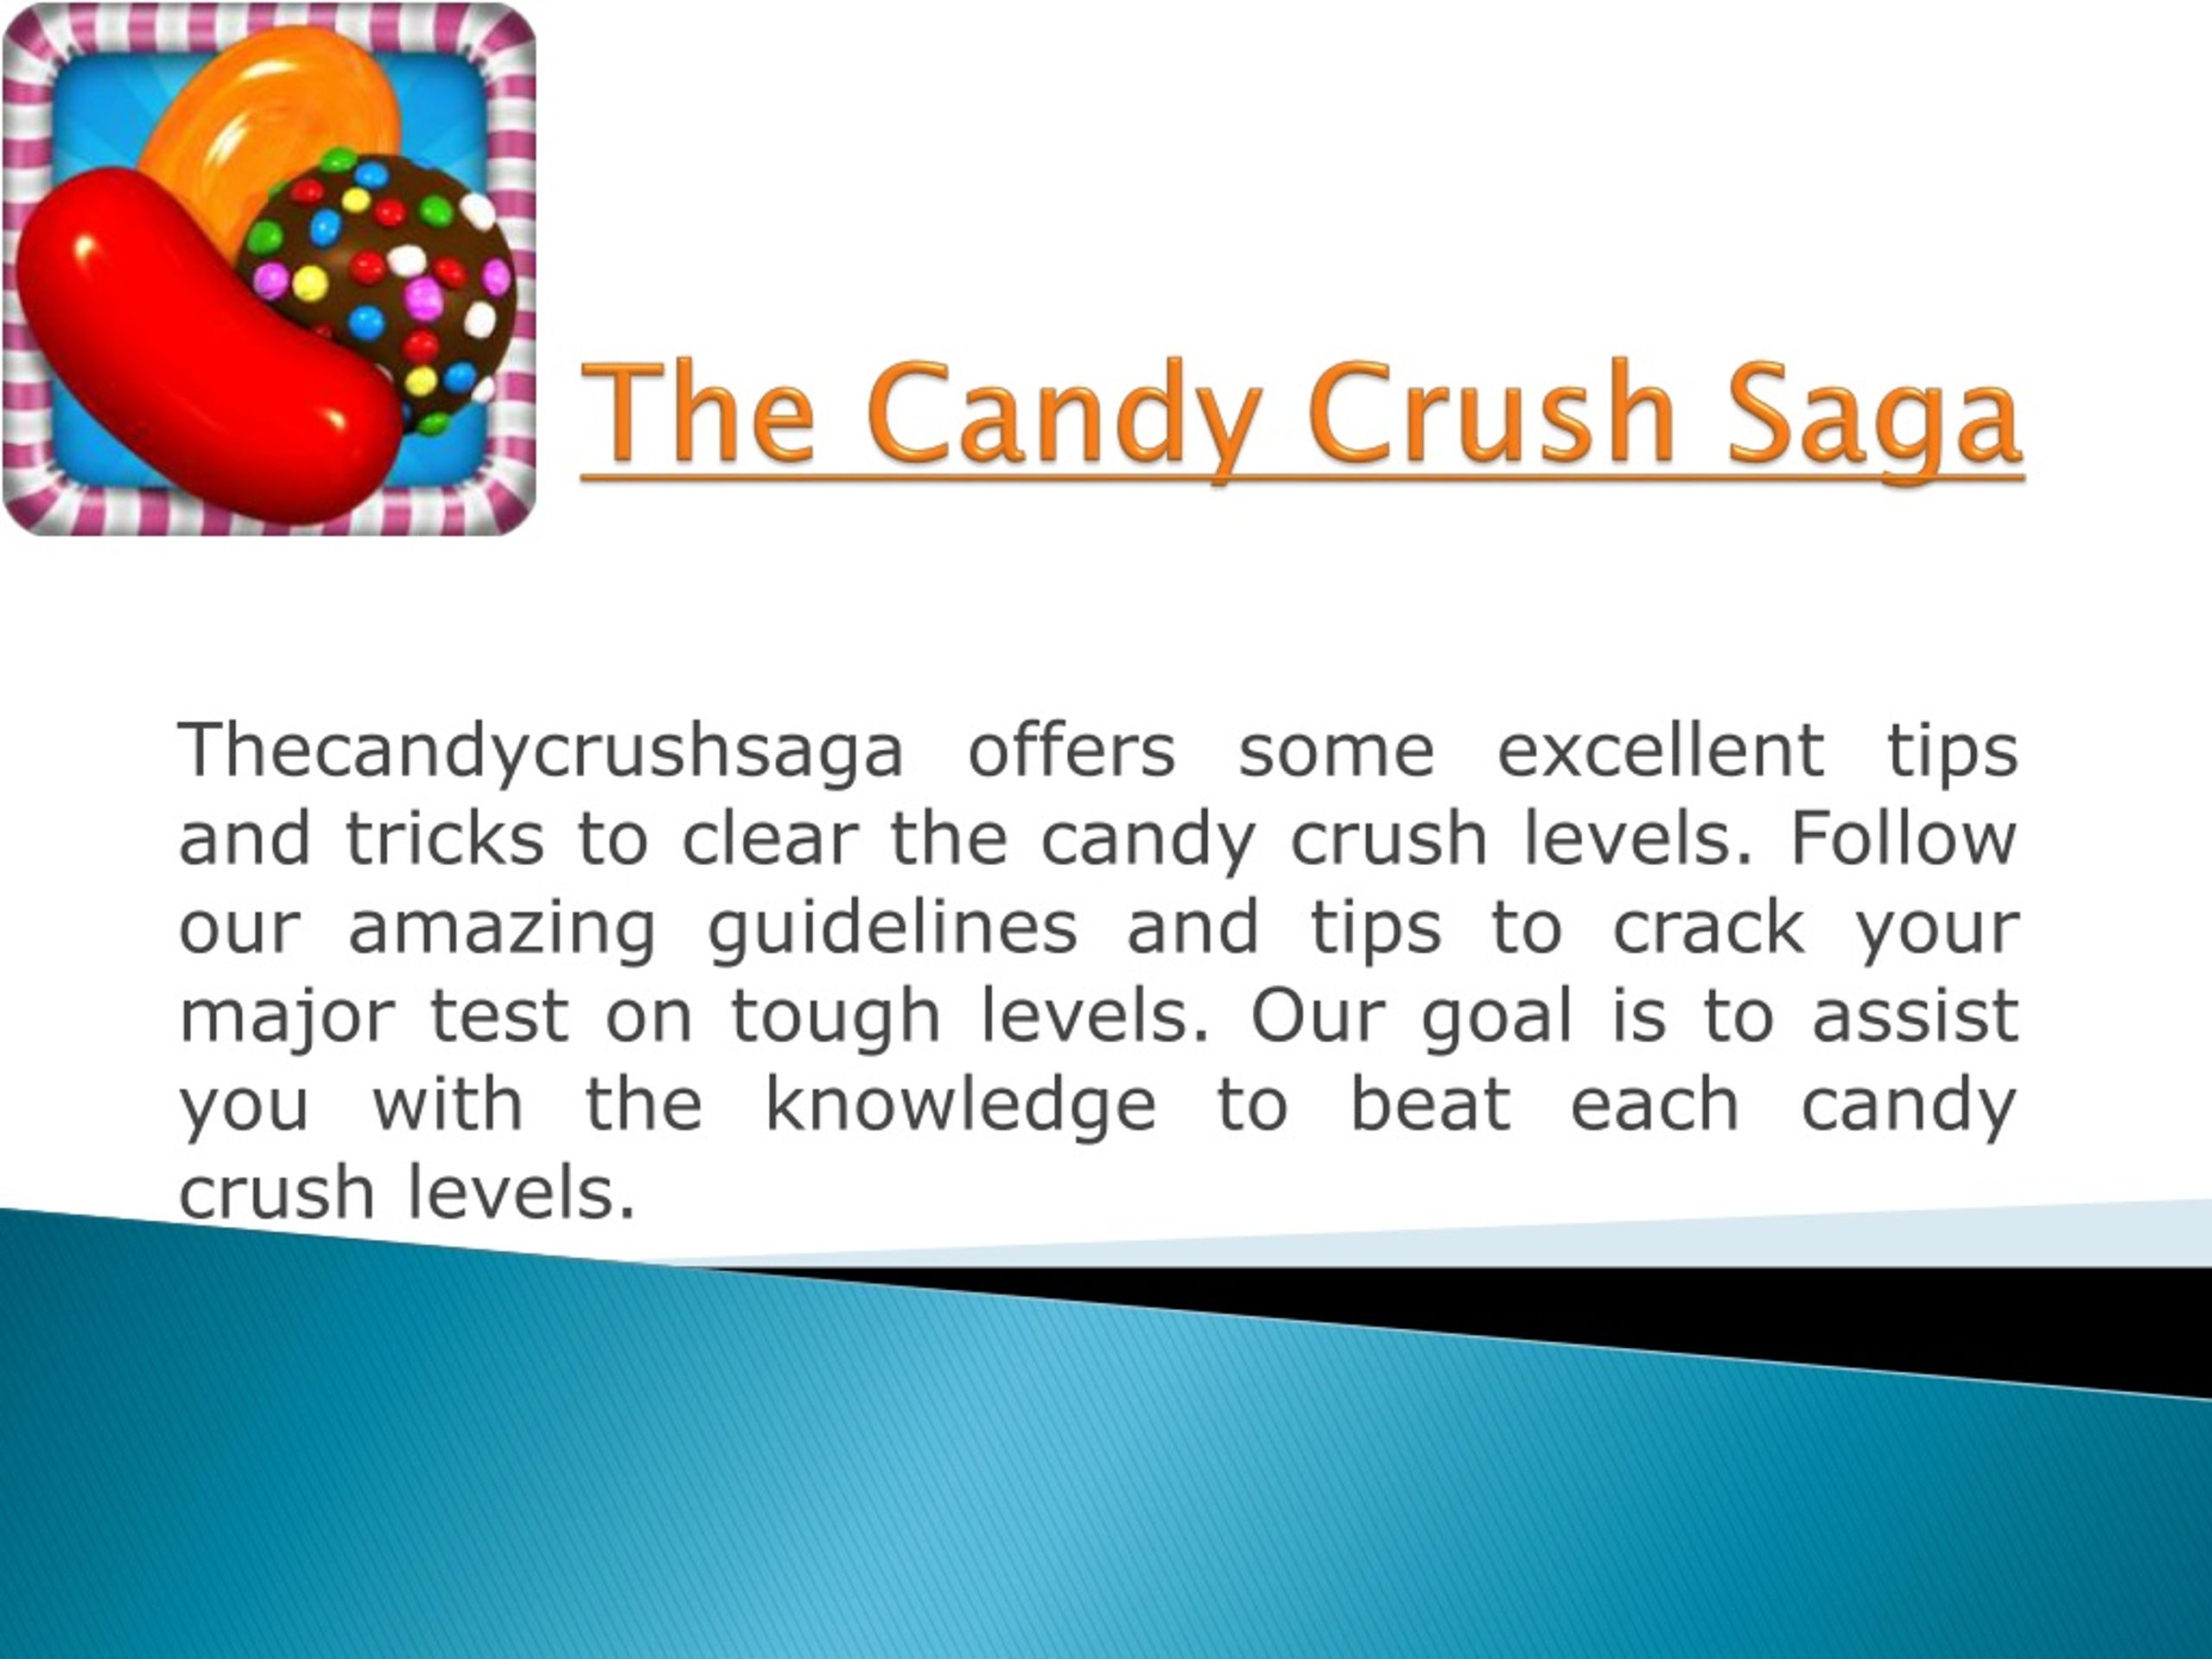 what's your monday mood? - Candy Crush Saga